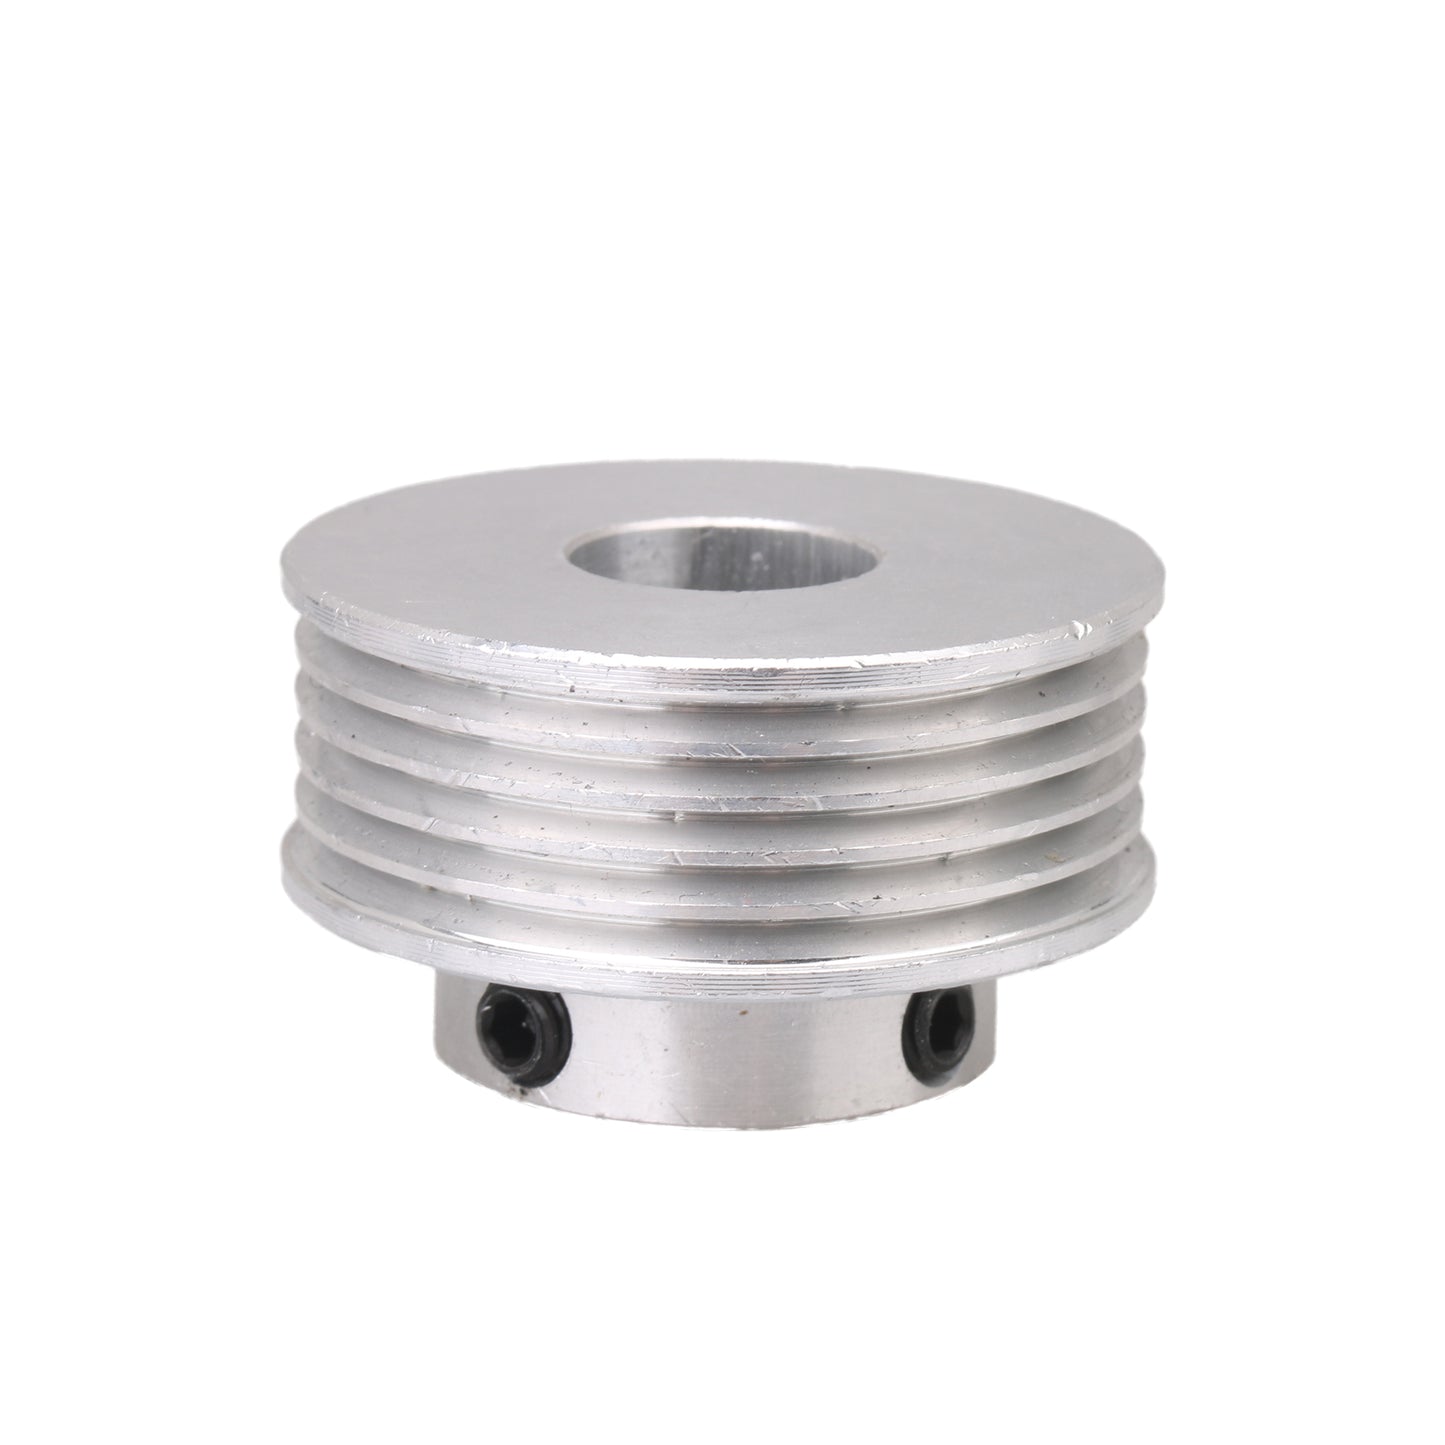 BQLZR 6 Teeth Outer Diameter 40mm Inner Hole 14mm PJ Belt Pulley for Motor Shaft Mini Table Electric Saw Sawing Machines